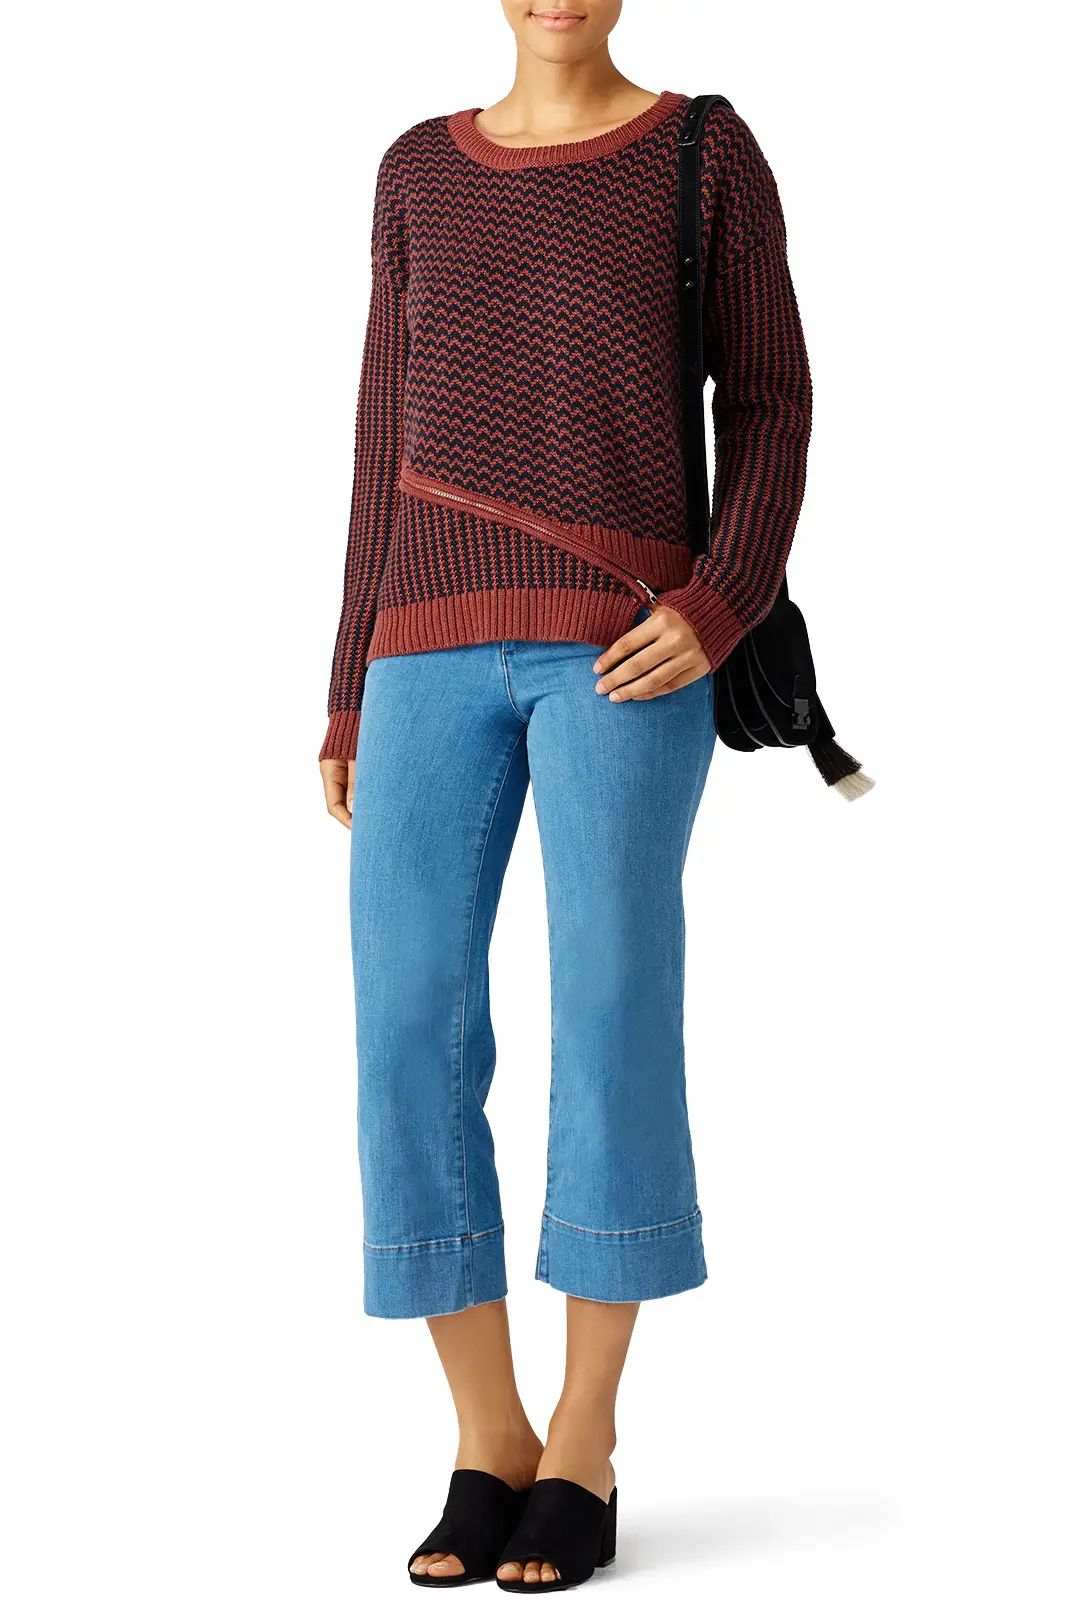 ASTR Burgundy Mixed Stitch Sweater | Rent The Runway